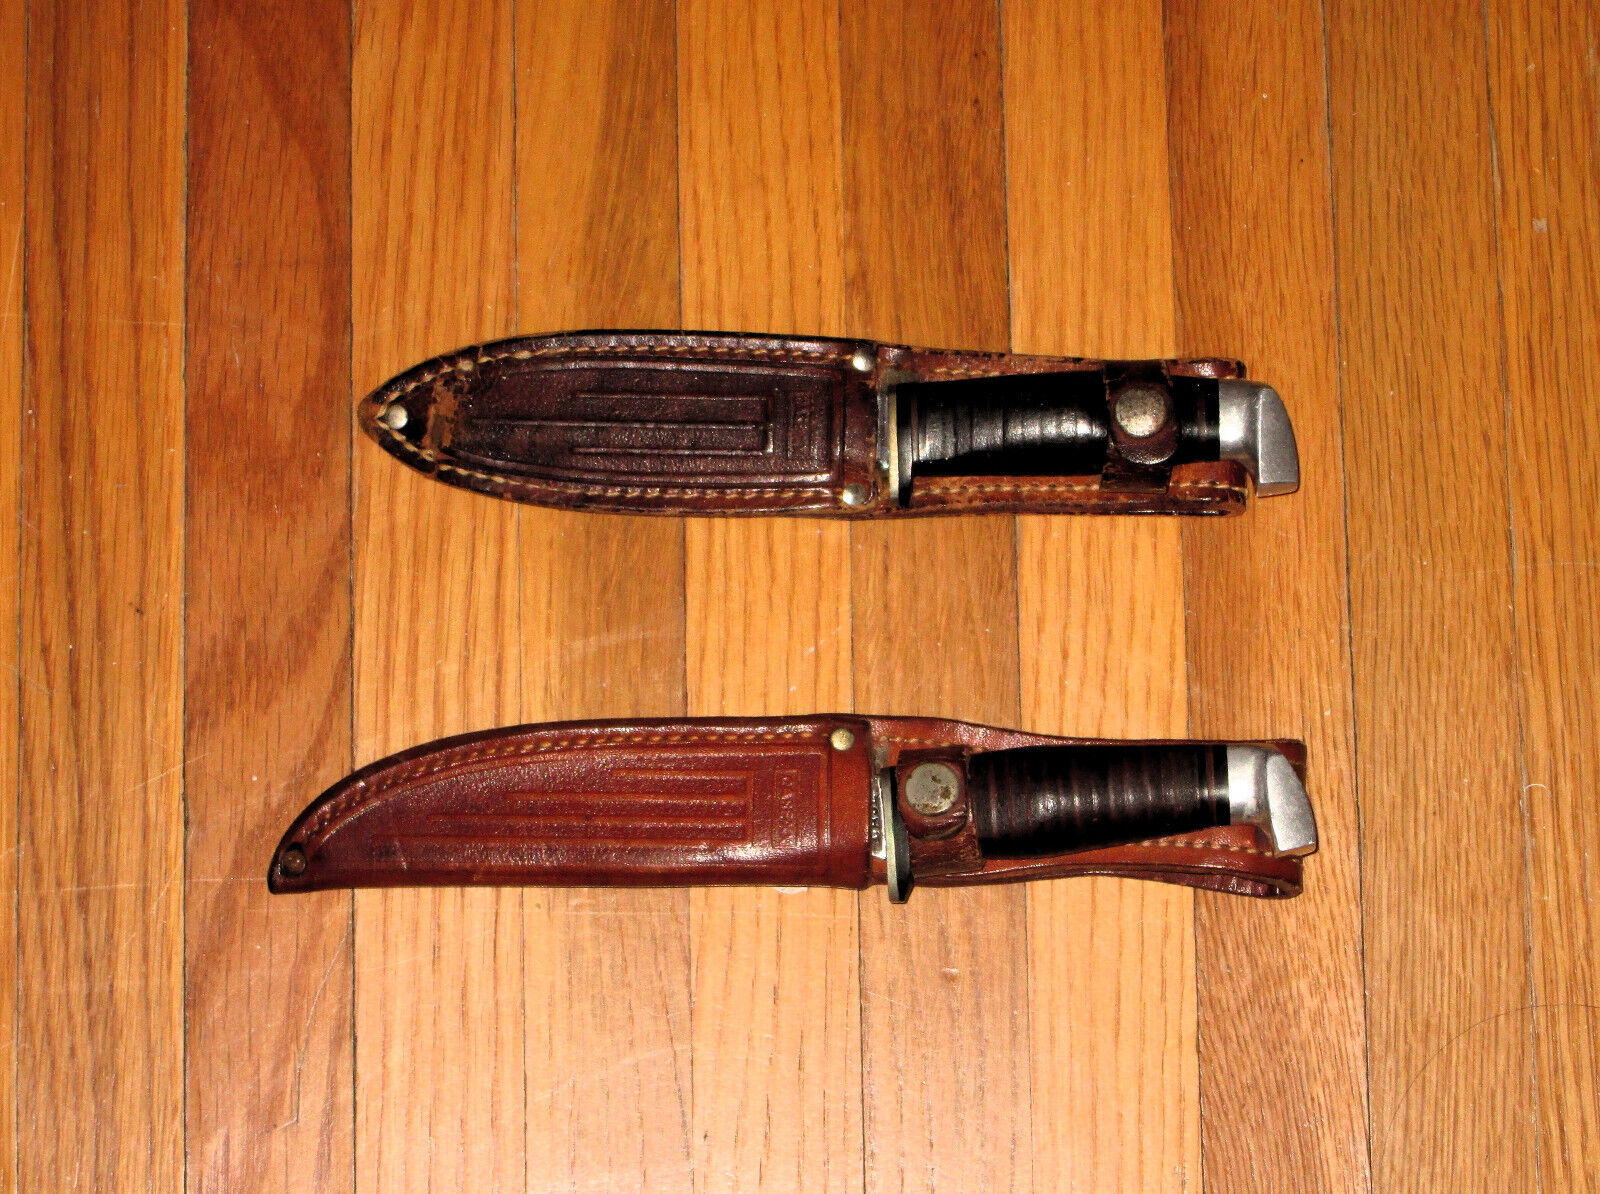 Lot of 2: CASE Hunting Knives - Includes Sheaths